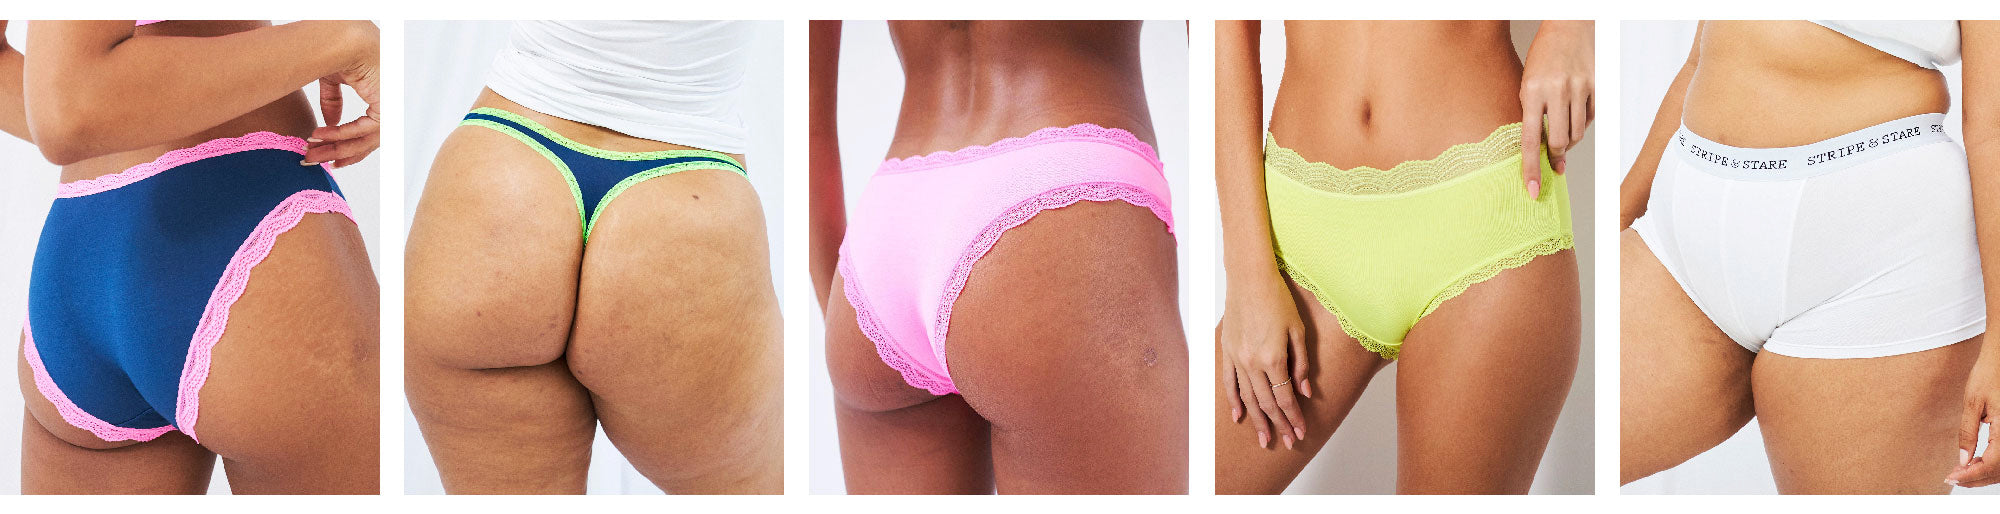 Close up shots of different knicker shapes